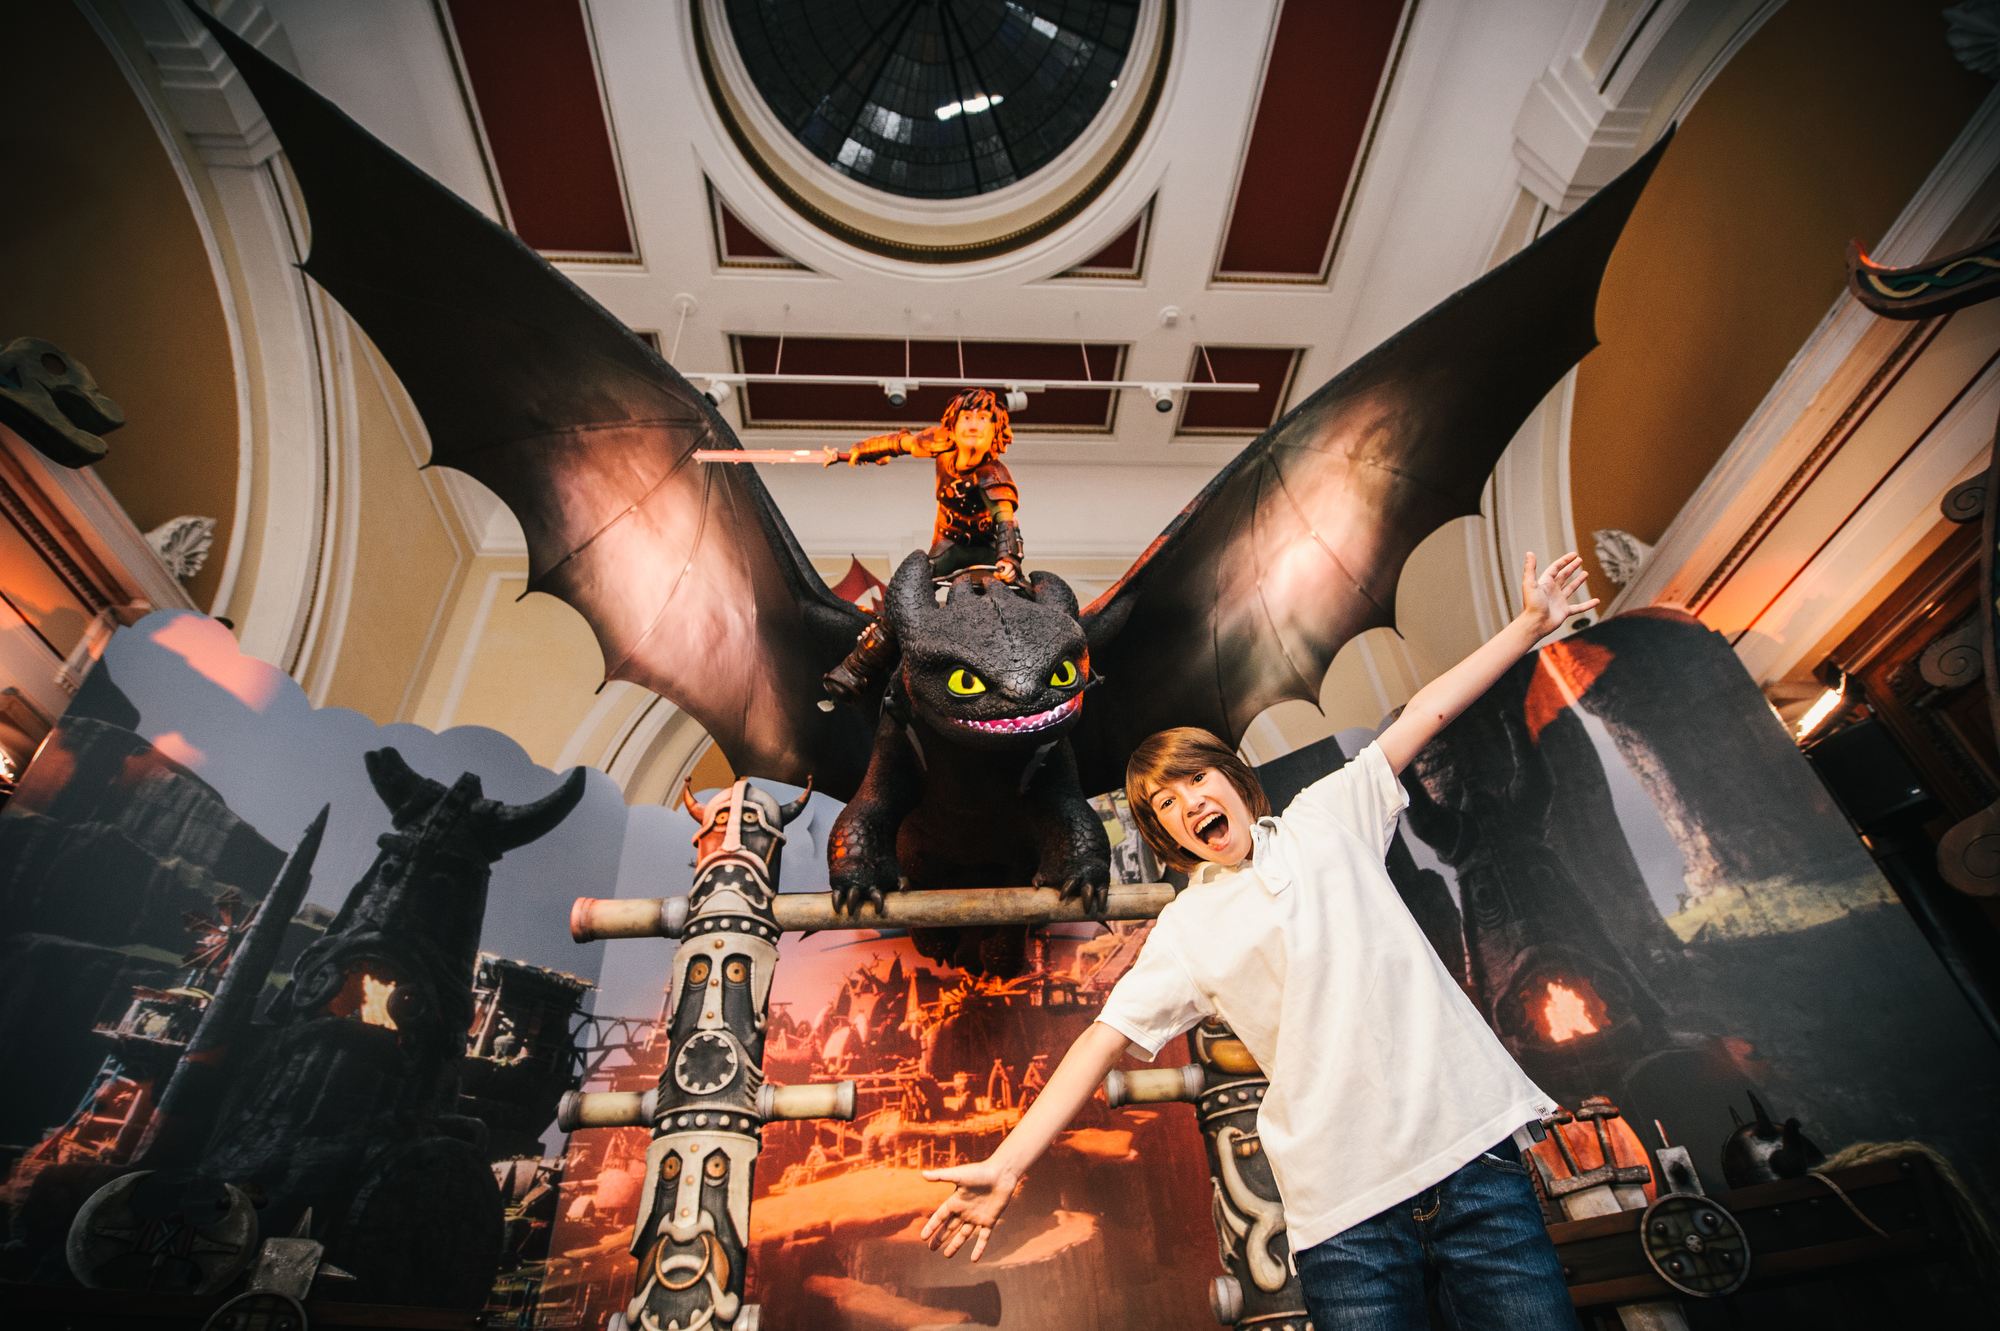 17 James Jefferson, Age 10 Enjoys The How To Train Your Dragon Experience In Shrek's Adventure London